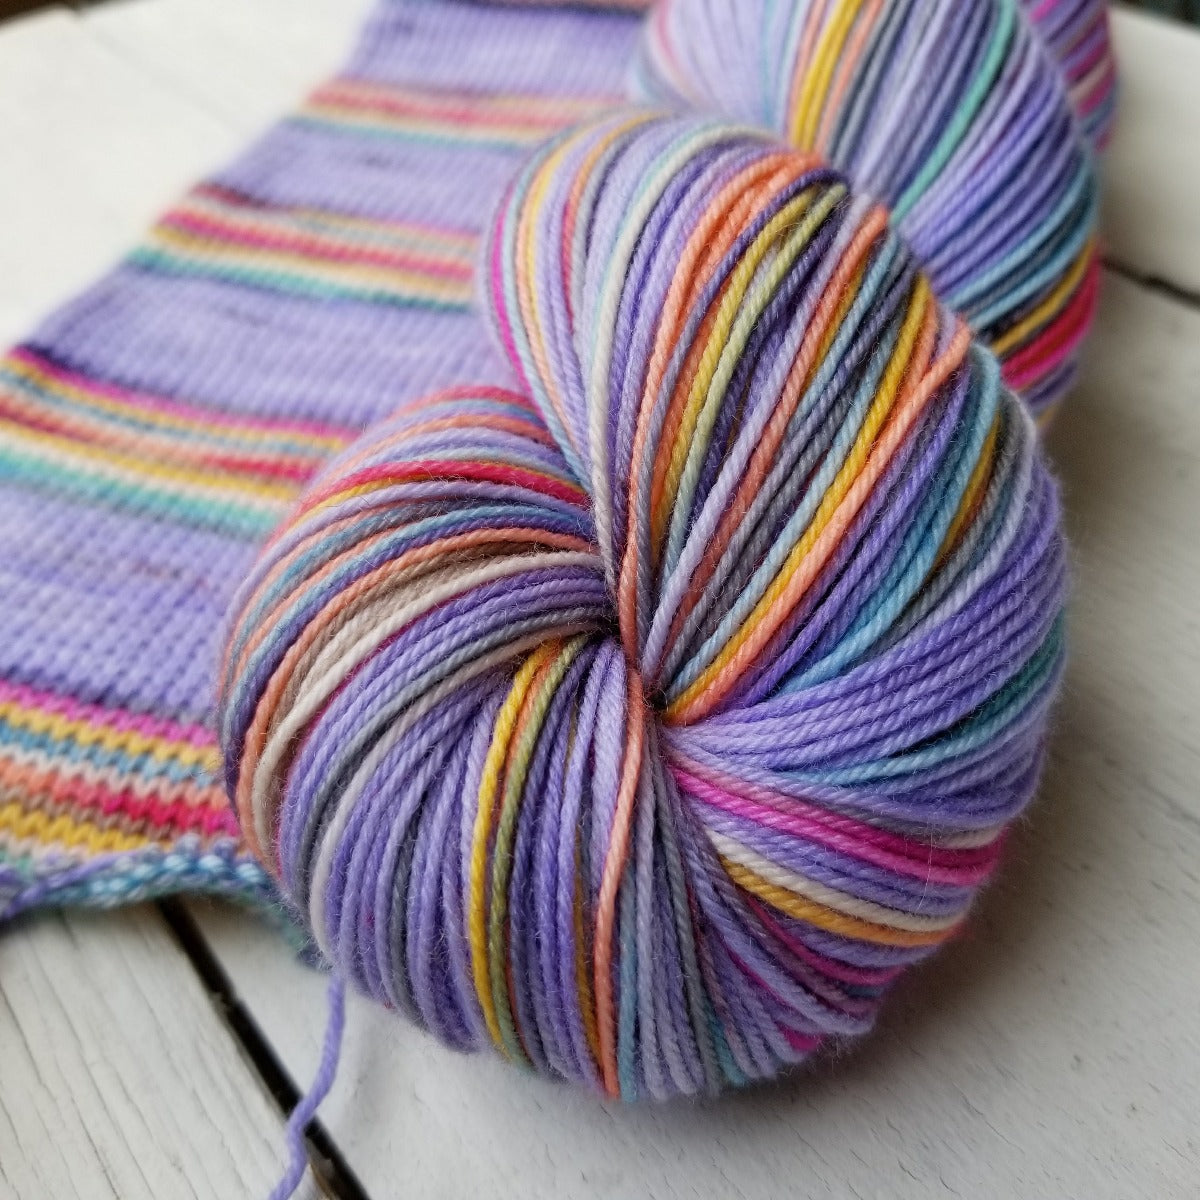 Lavender Apple Blossom -must match set - Must Stash self striping sock yarn fun colorful knitting large skein twin matching double